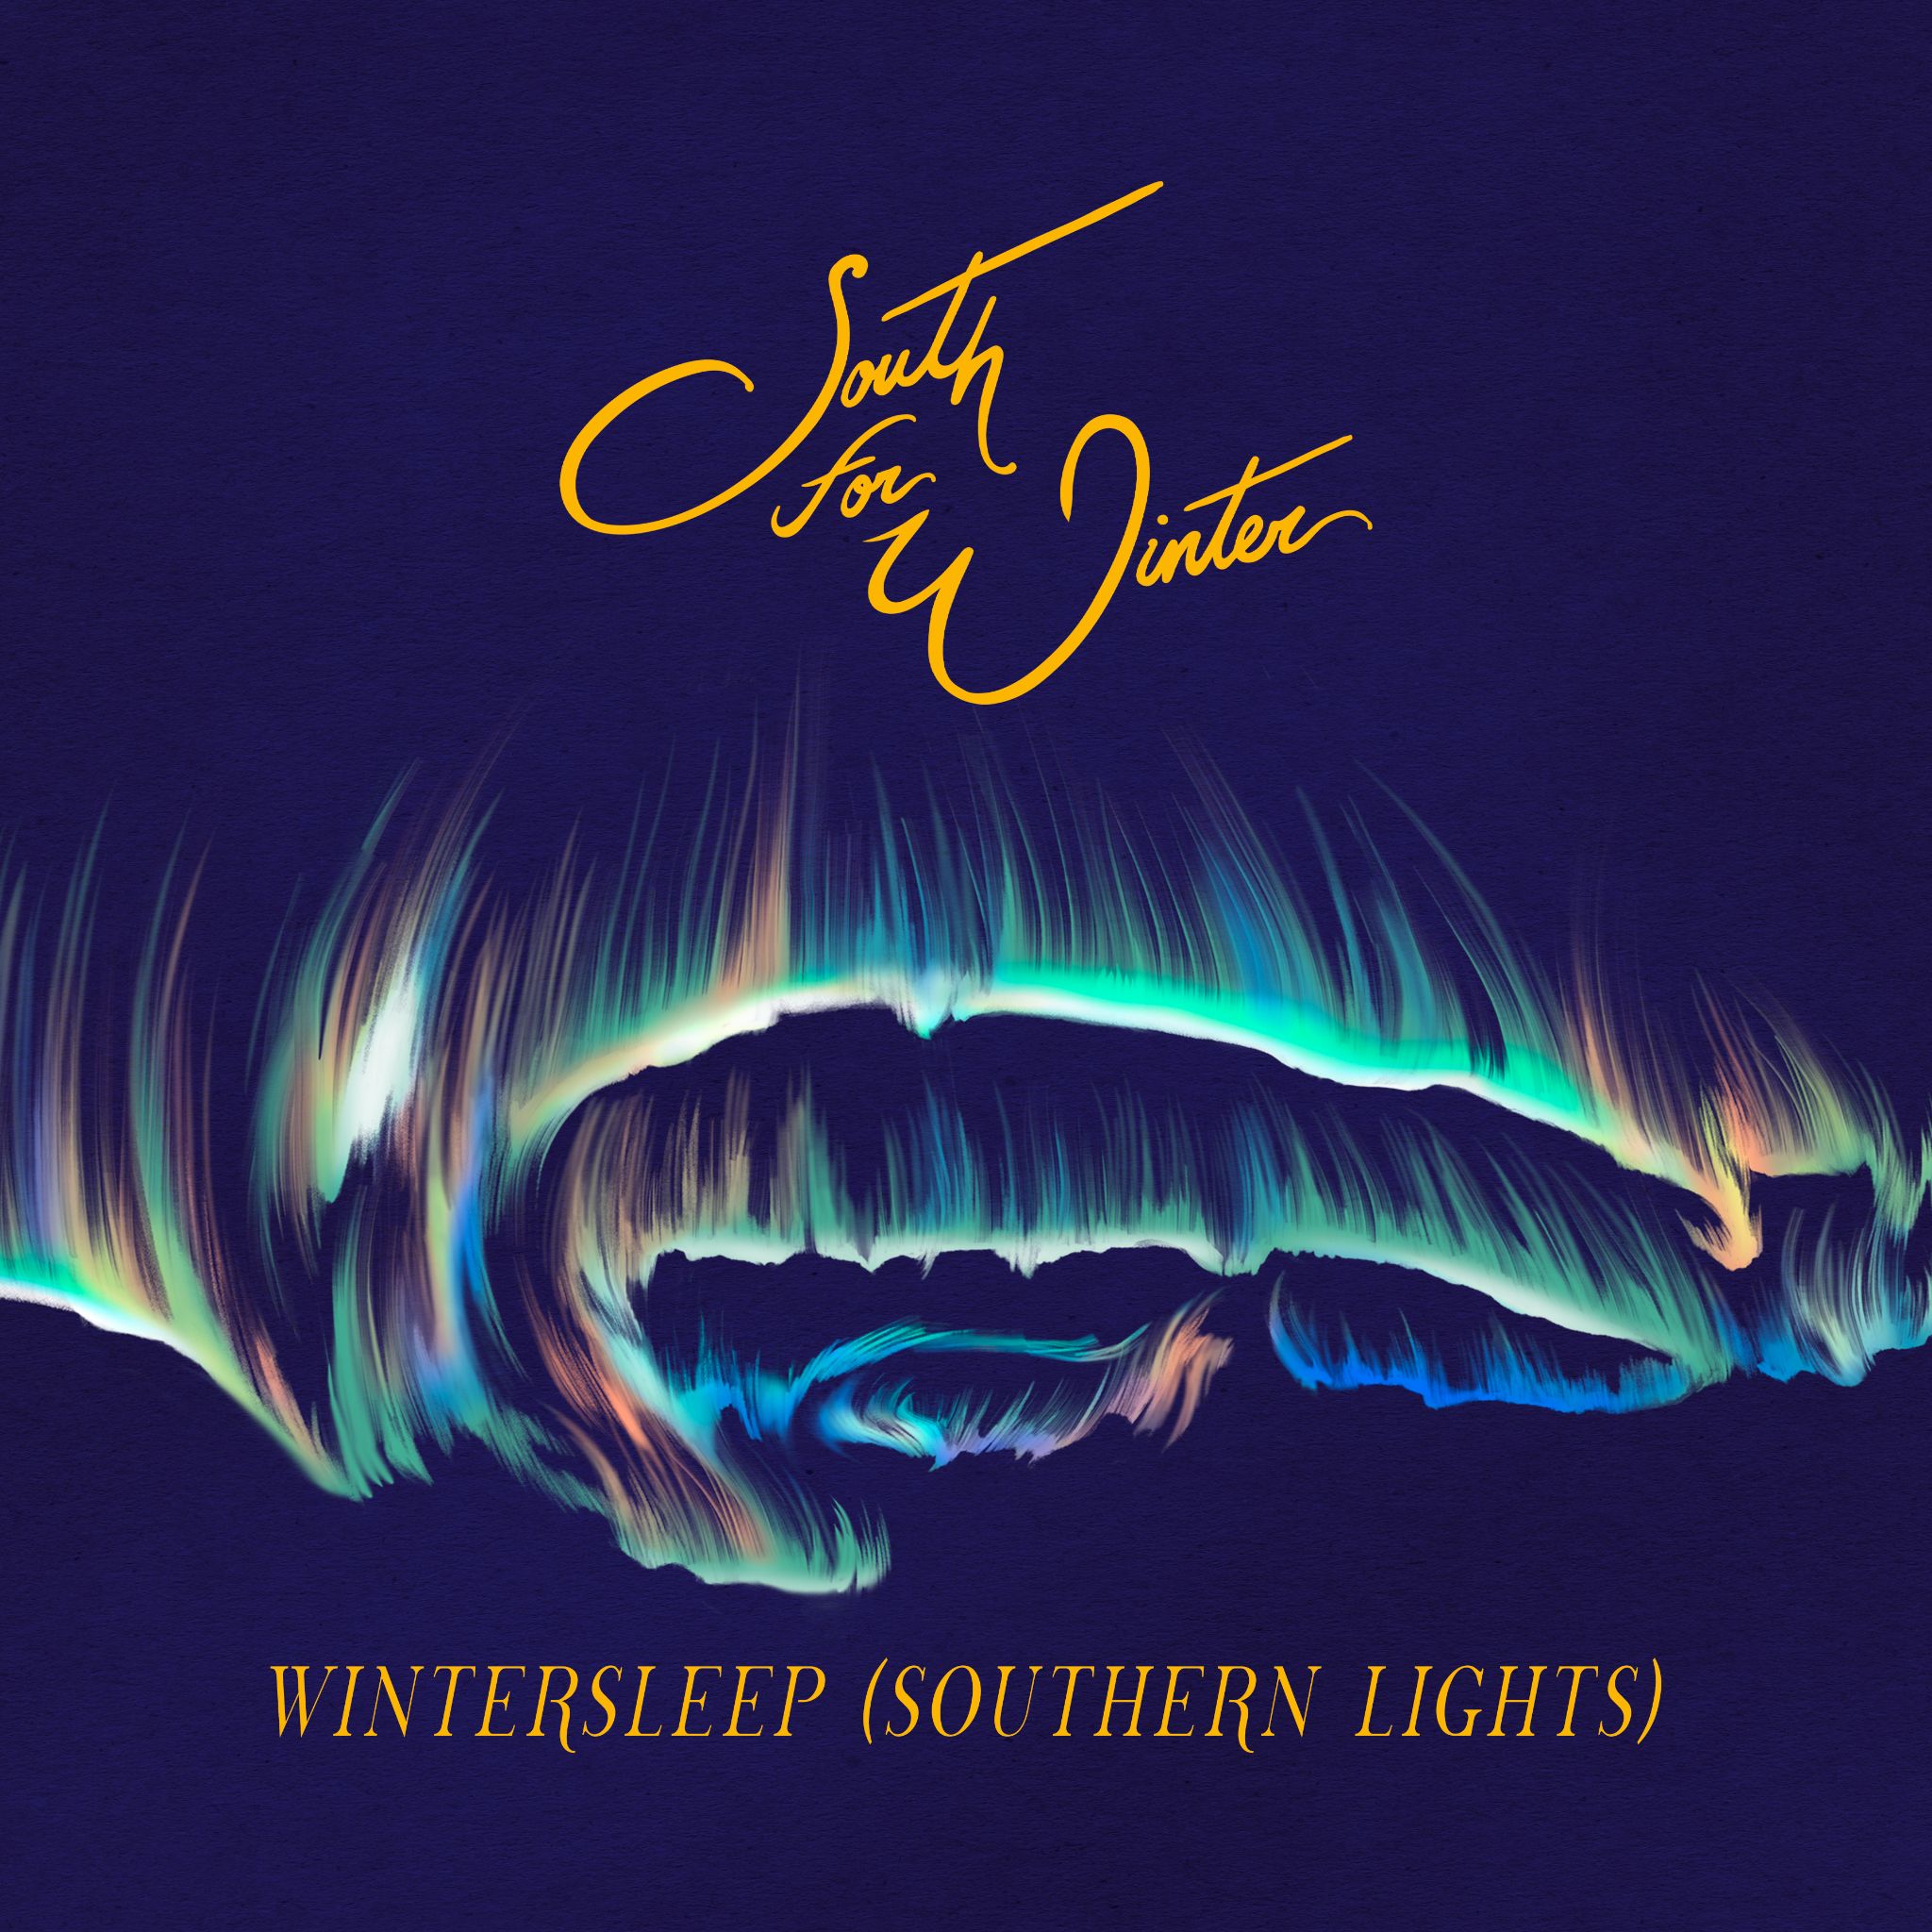 South For Winter is excited to announce the release of single “Wintersleep (Southern Lights)”